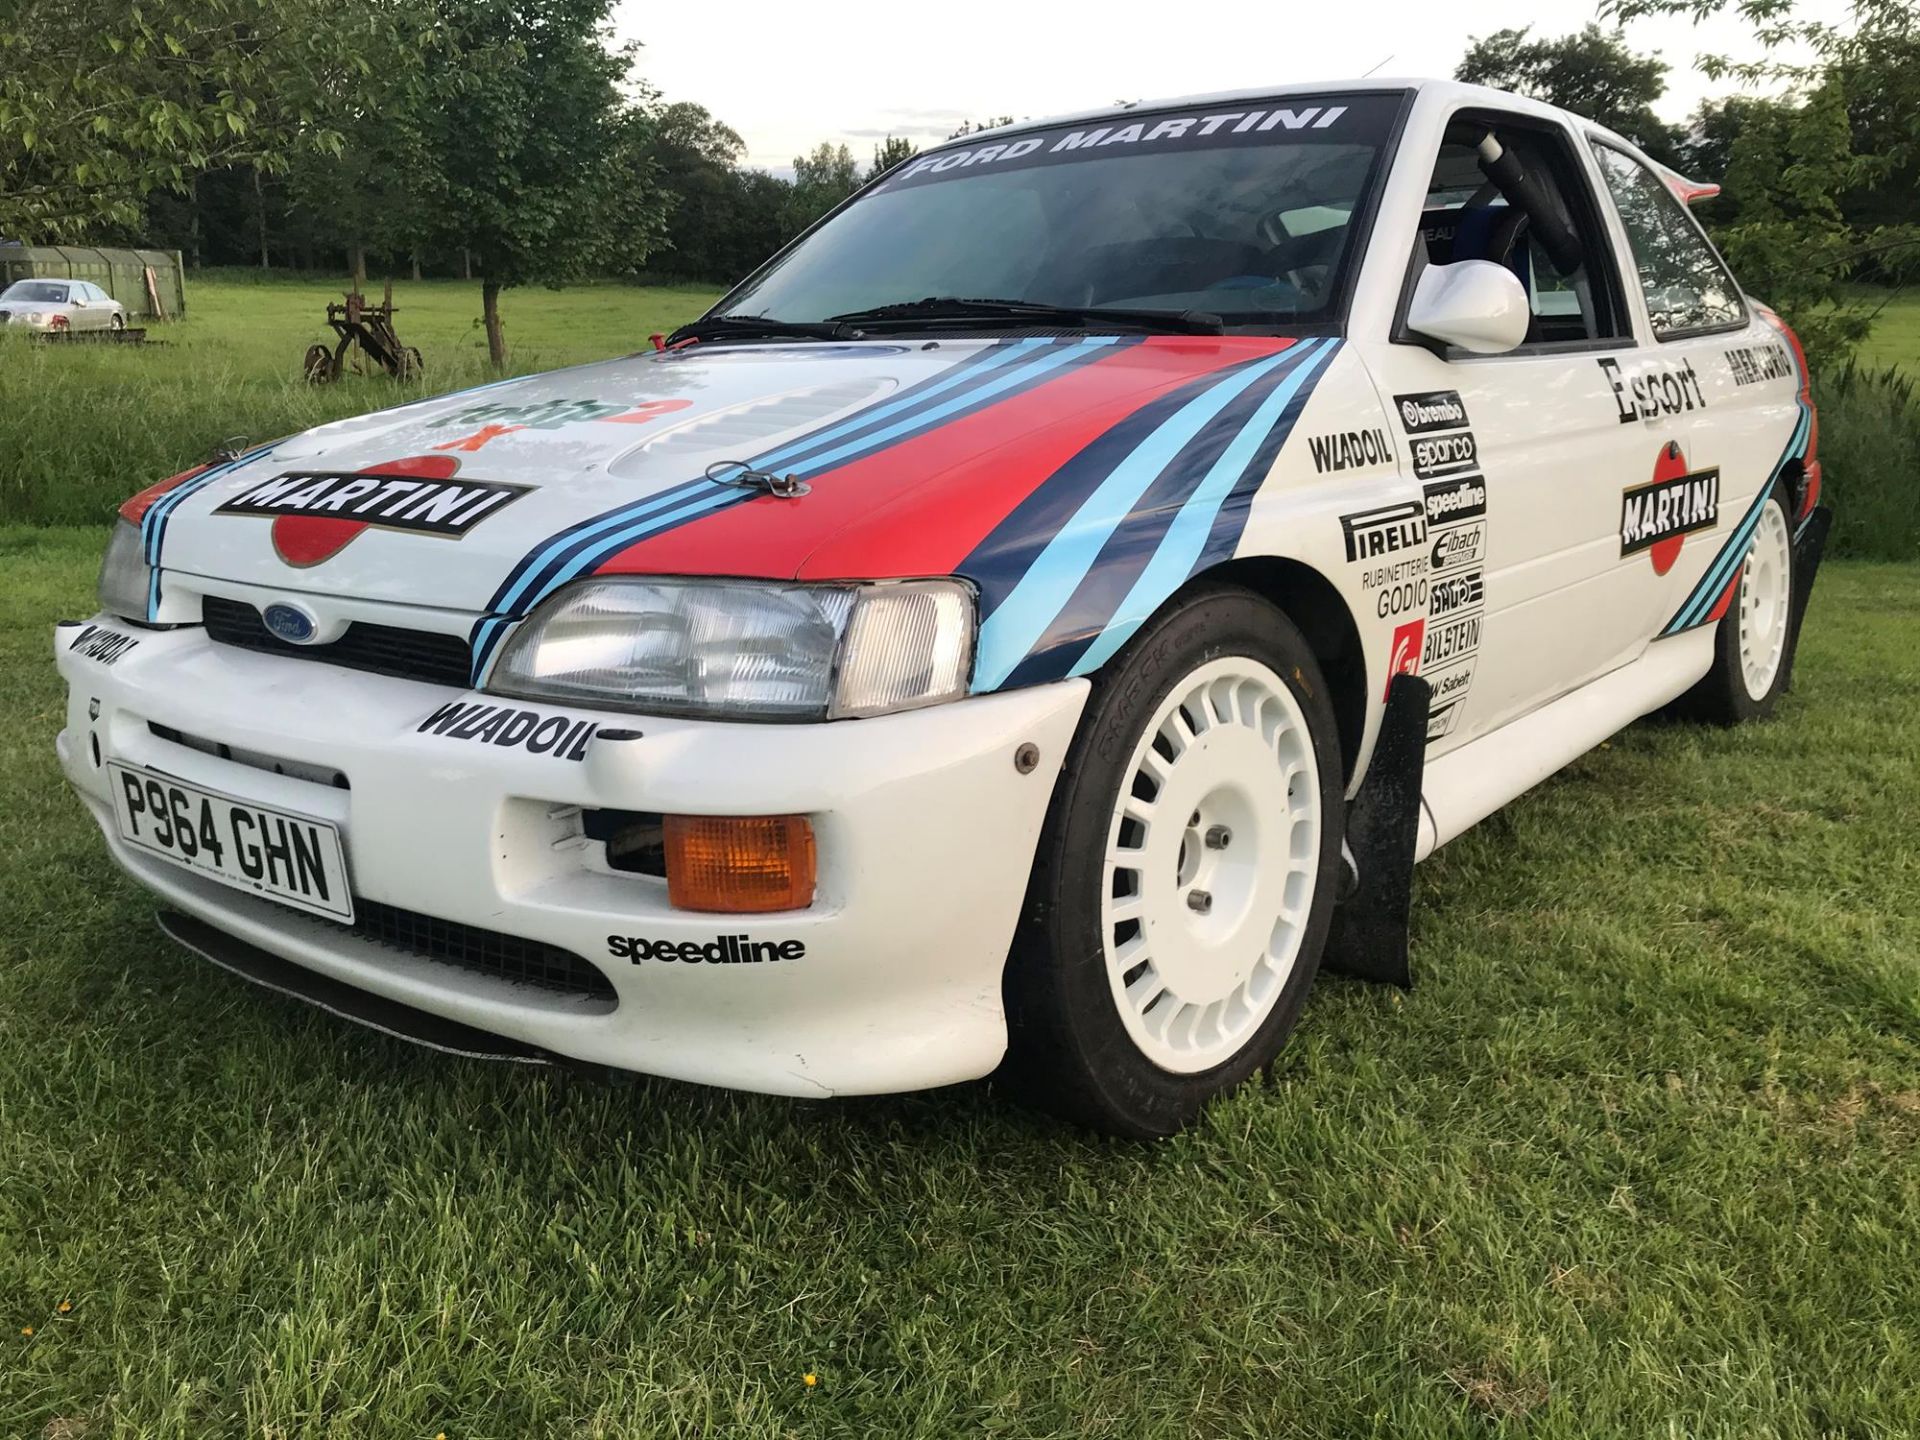 1997 Ford Escort RS Cosworth Group N Rally Car